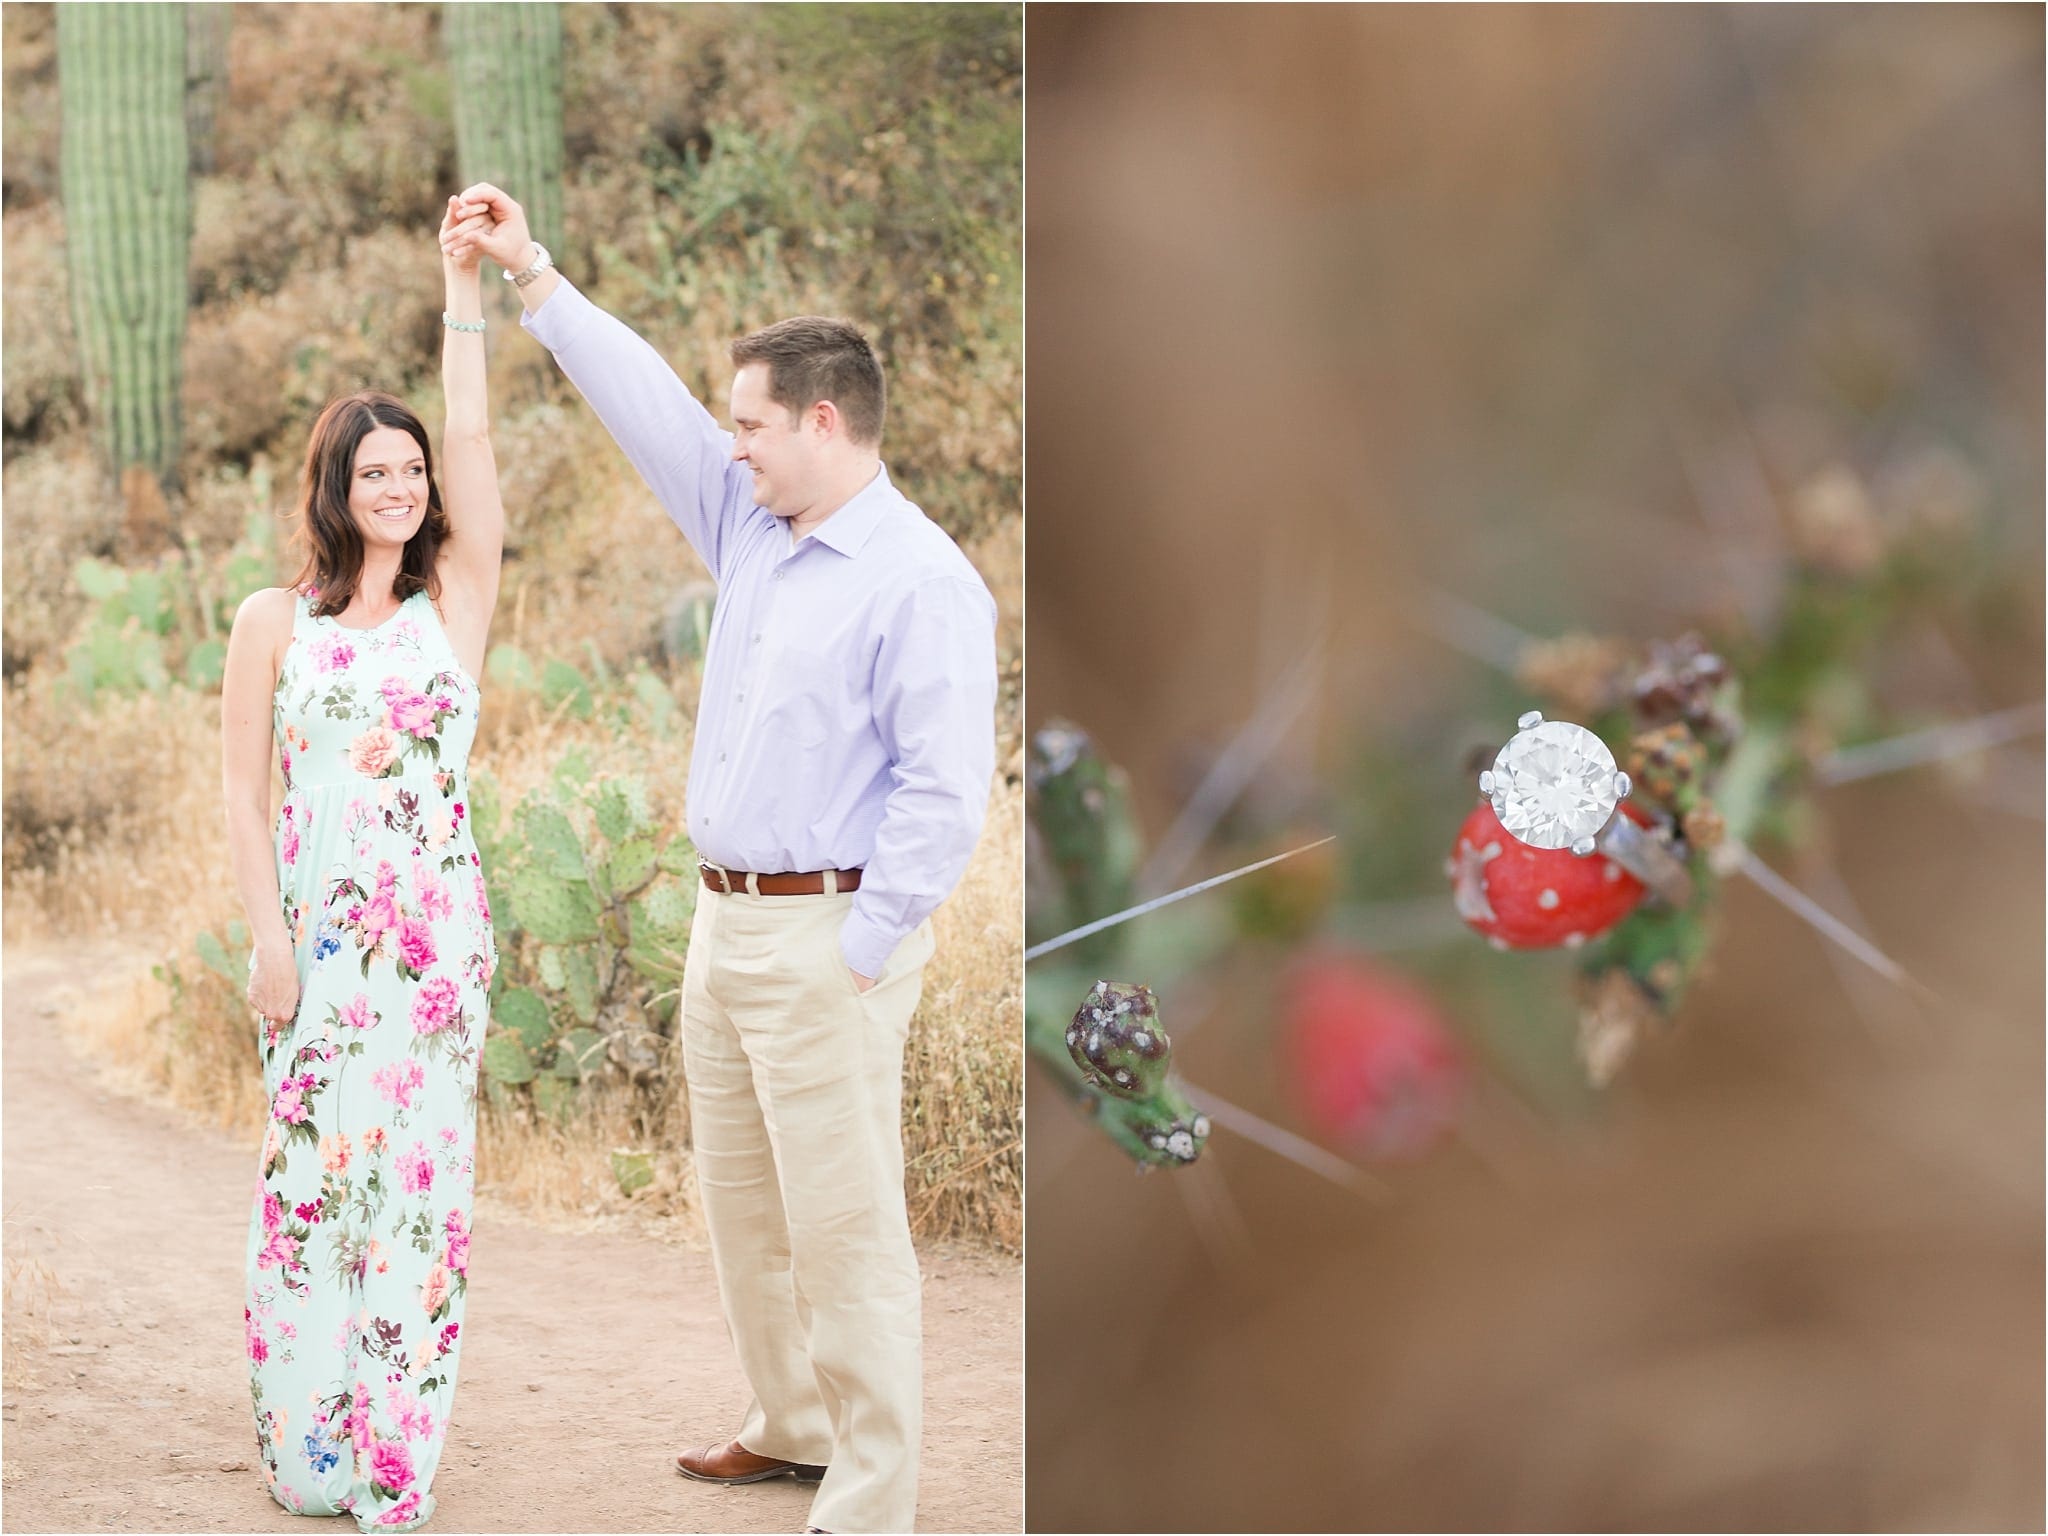 dancing in A Romantic Desert Engagement, ring on cactus bloom